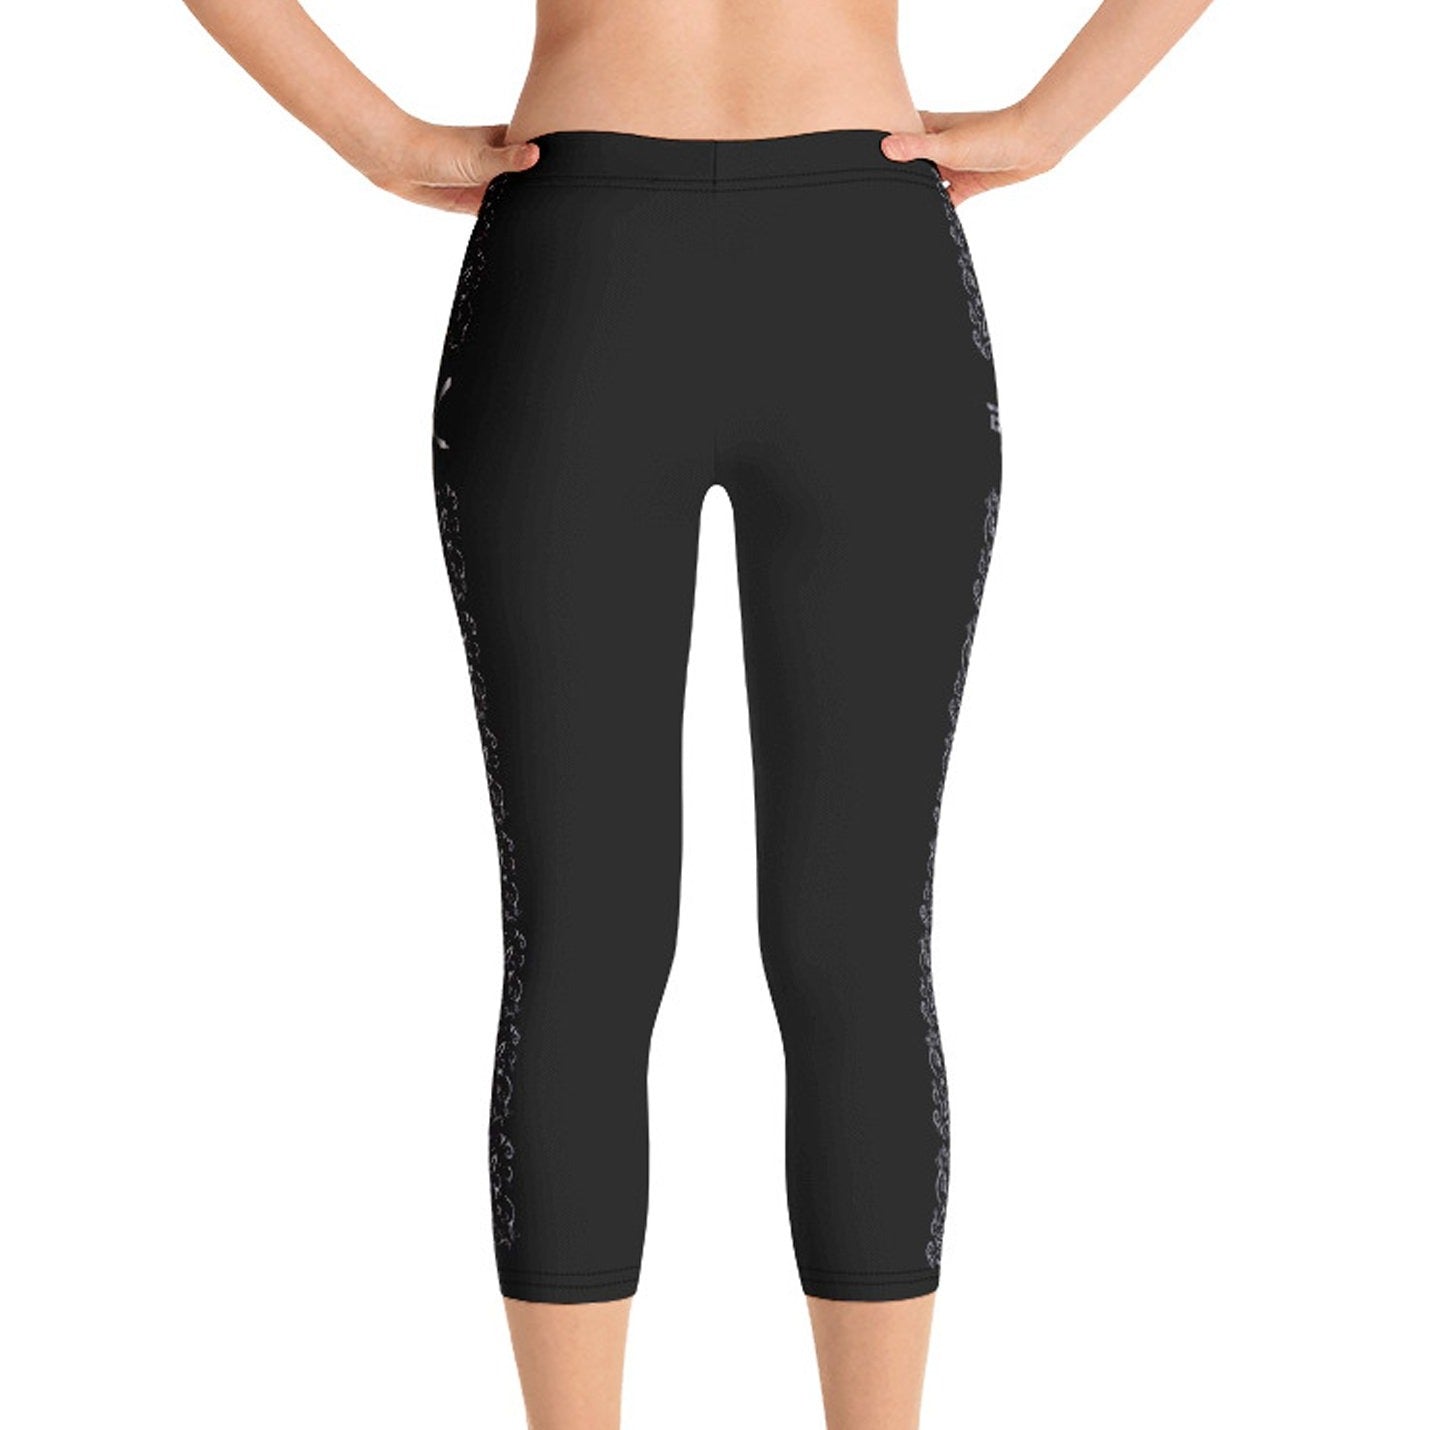 Paisley BX Capris - BollyX the Bollywood Workout